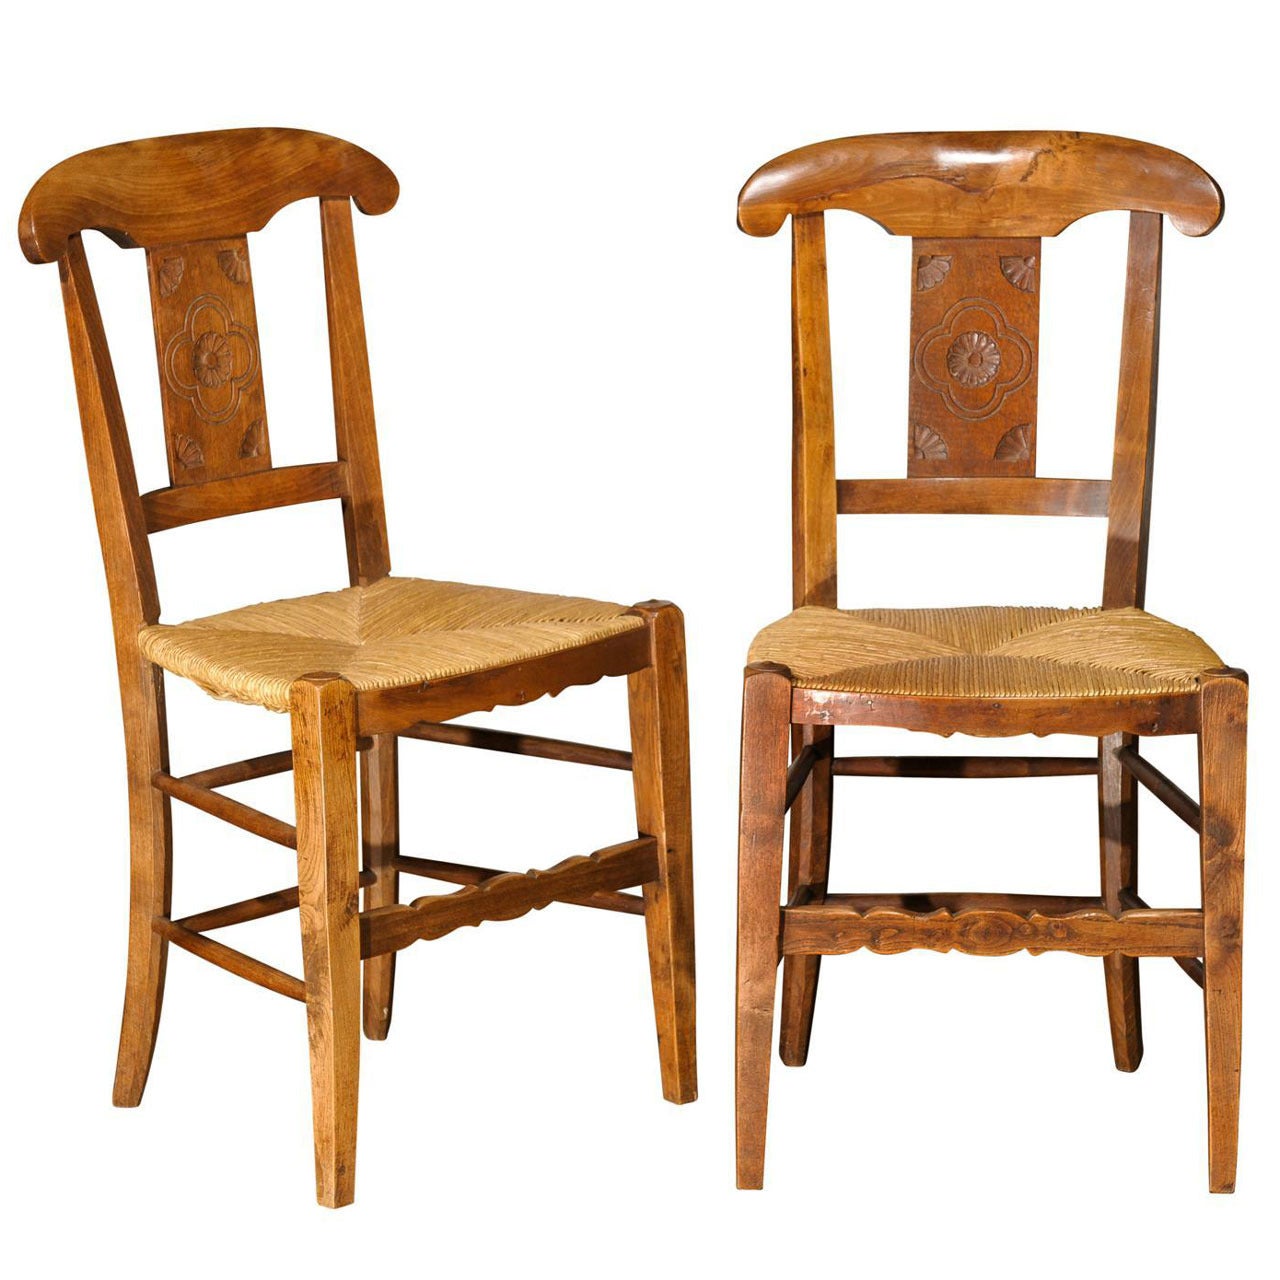 Carved Splat Side Chairs with Rush Seats